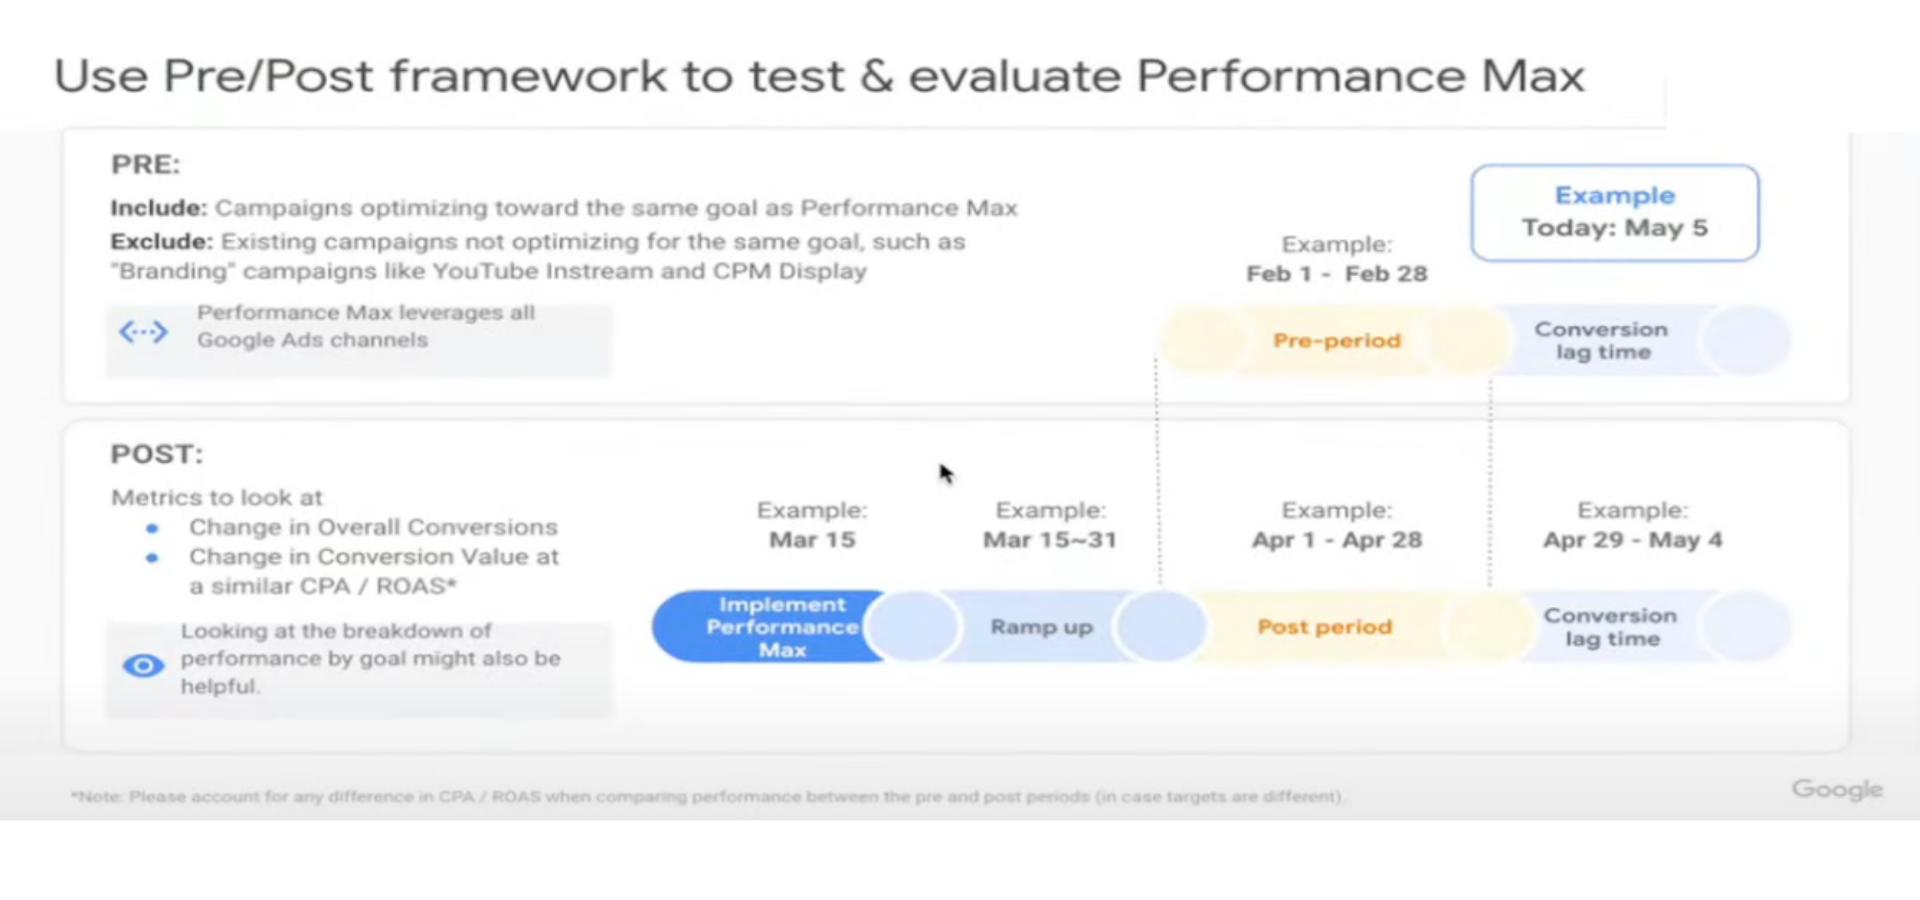 Performance Max questions answered by Google